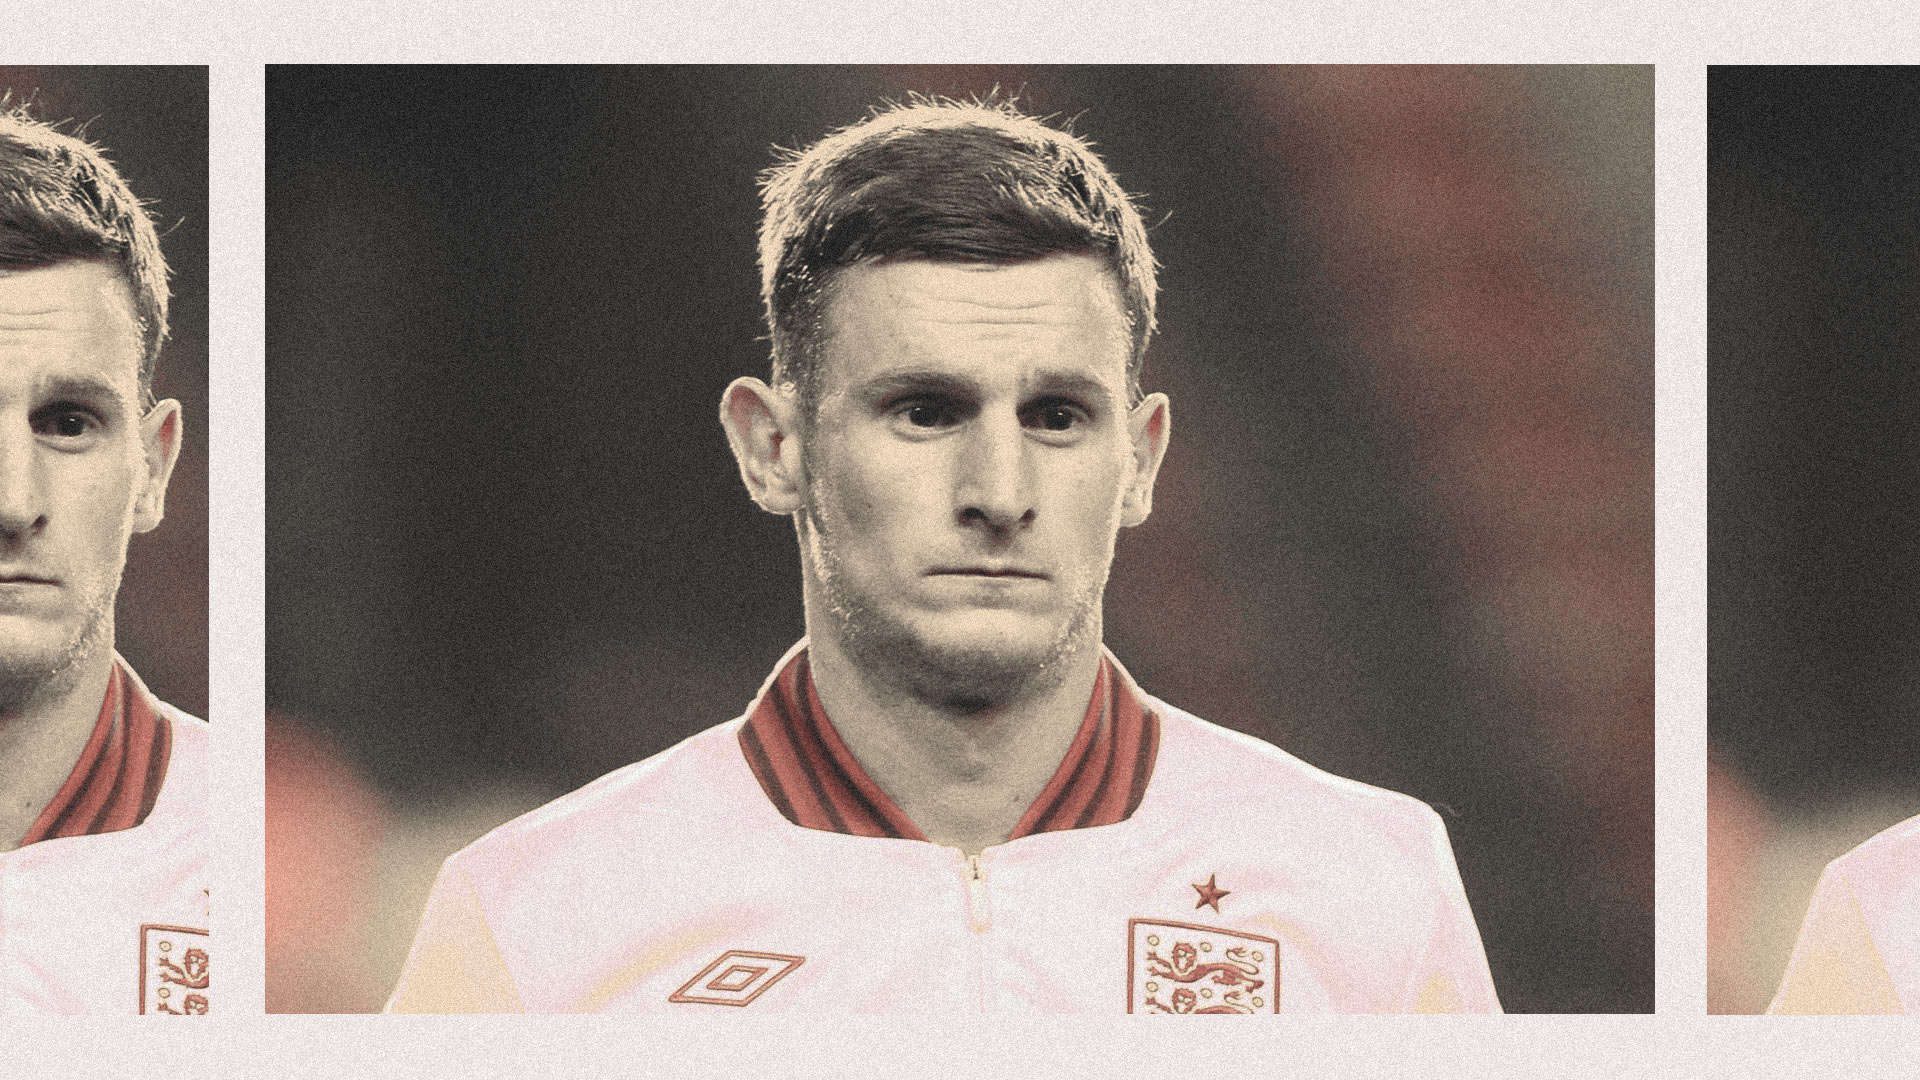 The same of image of Tom Leeds three times, he is lining up for an England Under-21s match in a tracksuit top, with the same facial expression he always has